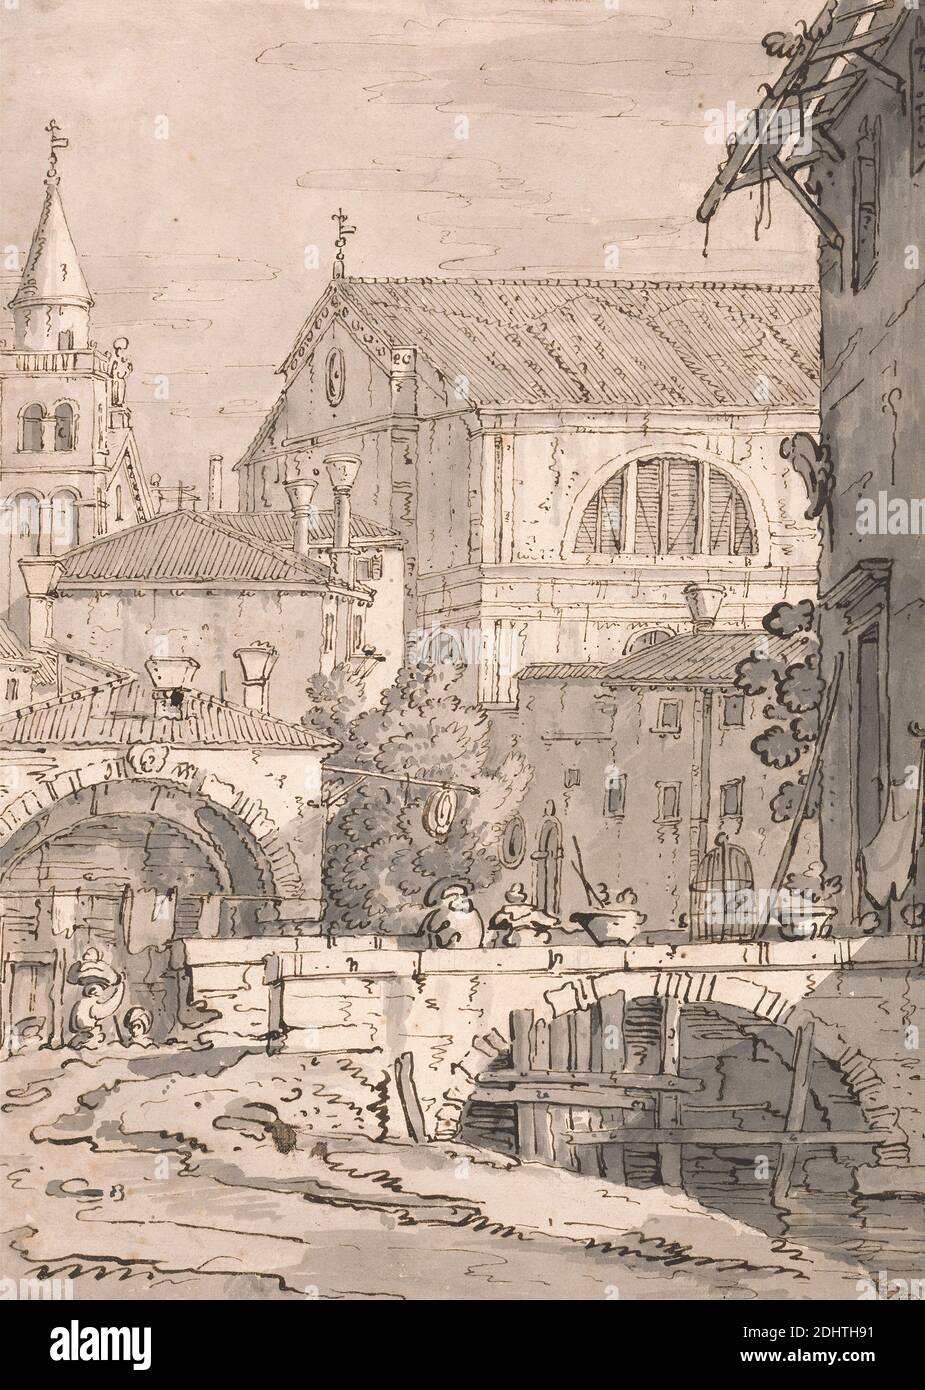 Venetian Fantasy, imitator of Canaletto, 1697–1768, Venetian, active in Britain (1746–55), formerly attributed to Paul Sandby RA, 1731–1809, British, undated, Pen and brown ink, gray wash and graphite on medium, moderately textured, cream wove paper, Sheet: 11 1/2 x 8 3/8 inches (29.2 x 21.3 cm), architectural subject, architecture, birdcage, bridge (built work), cityscape, fantasy, genre subject, Grand Tour, laundry, weathervane, Europe, Italy, Veneto, Venezia, Venice Stock Photo